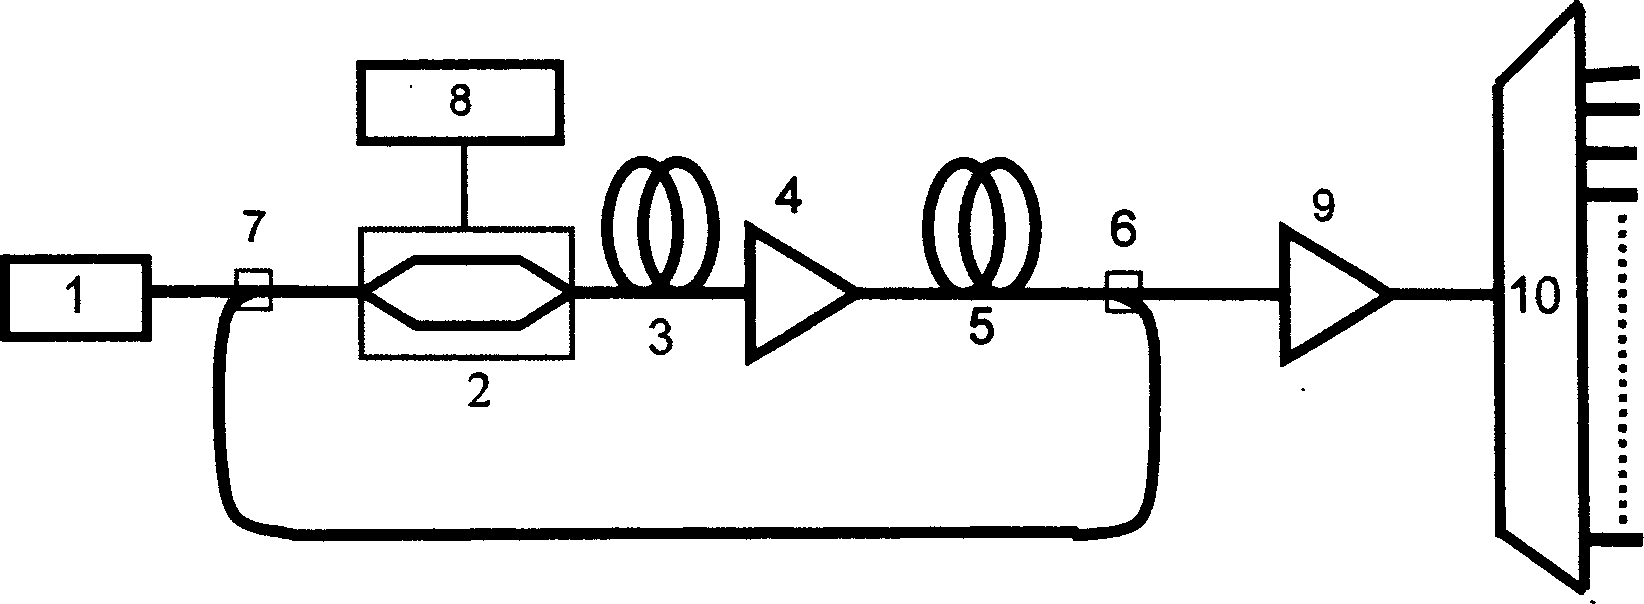 Multiple wavelength ultra continuous light sources